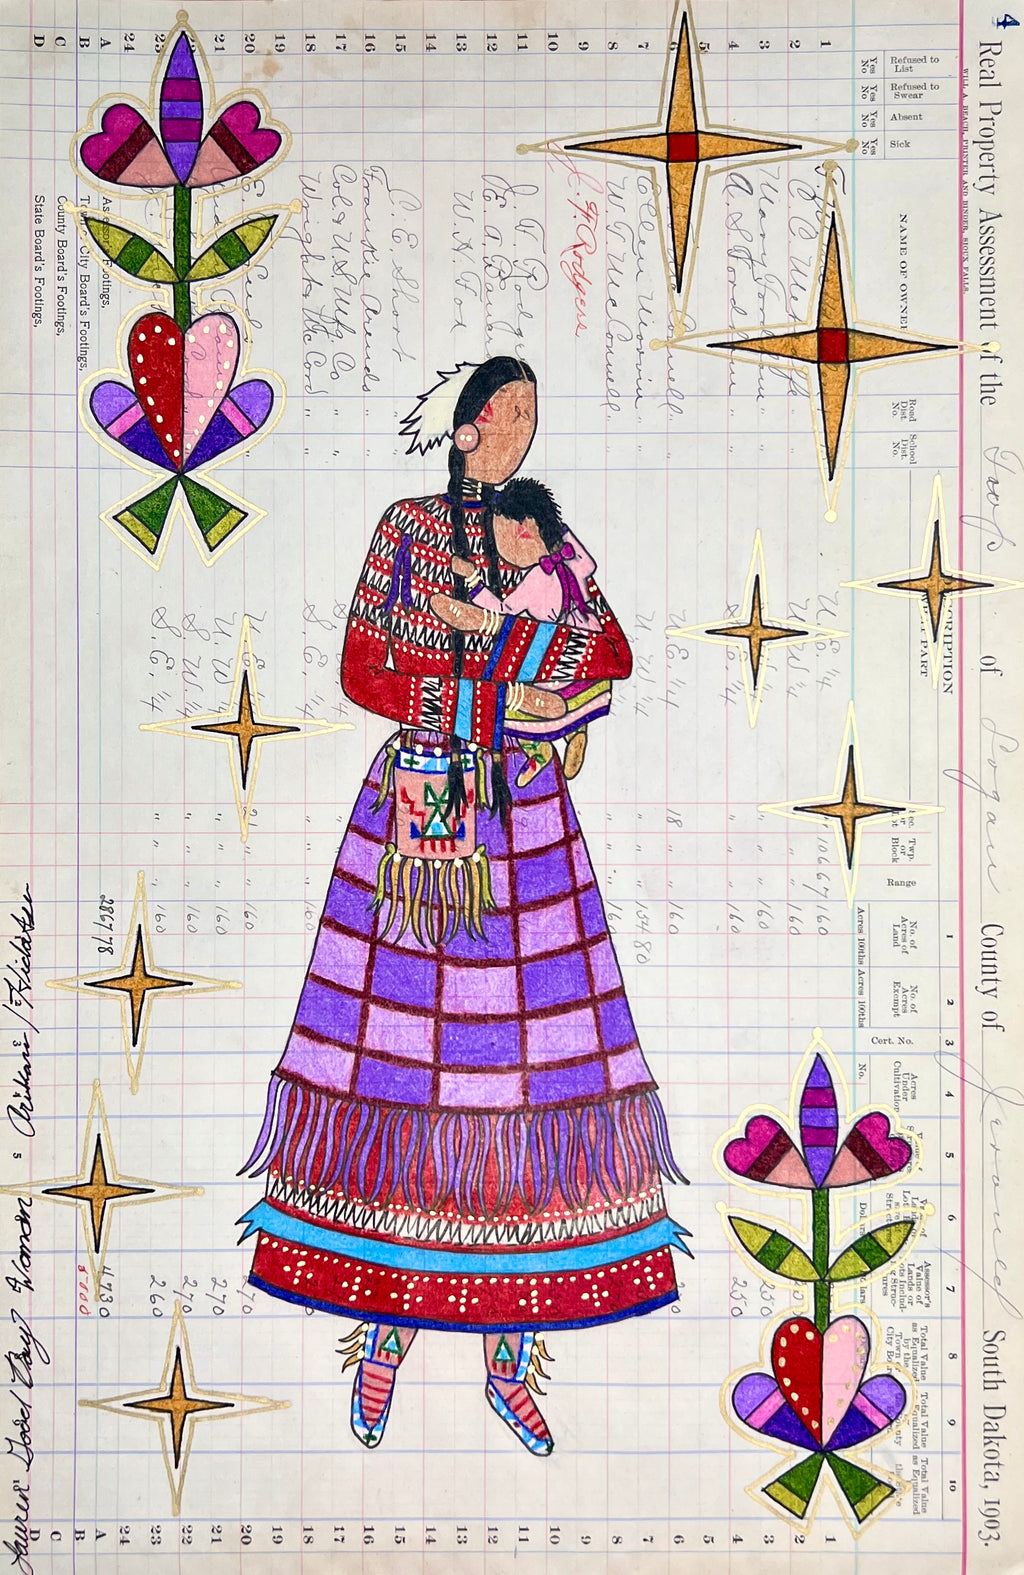 "With All My Heart & Sacred Stars" Original Ledger Drawing